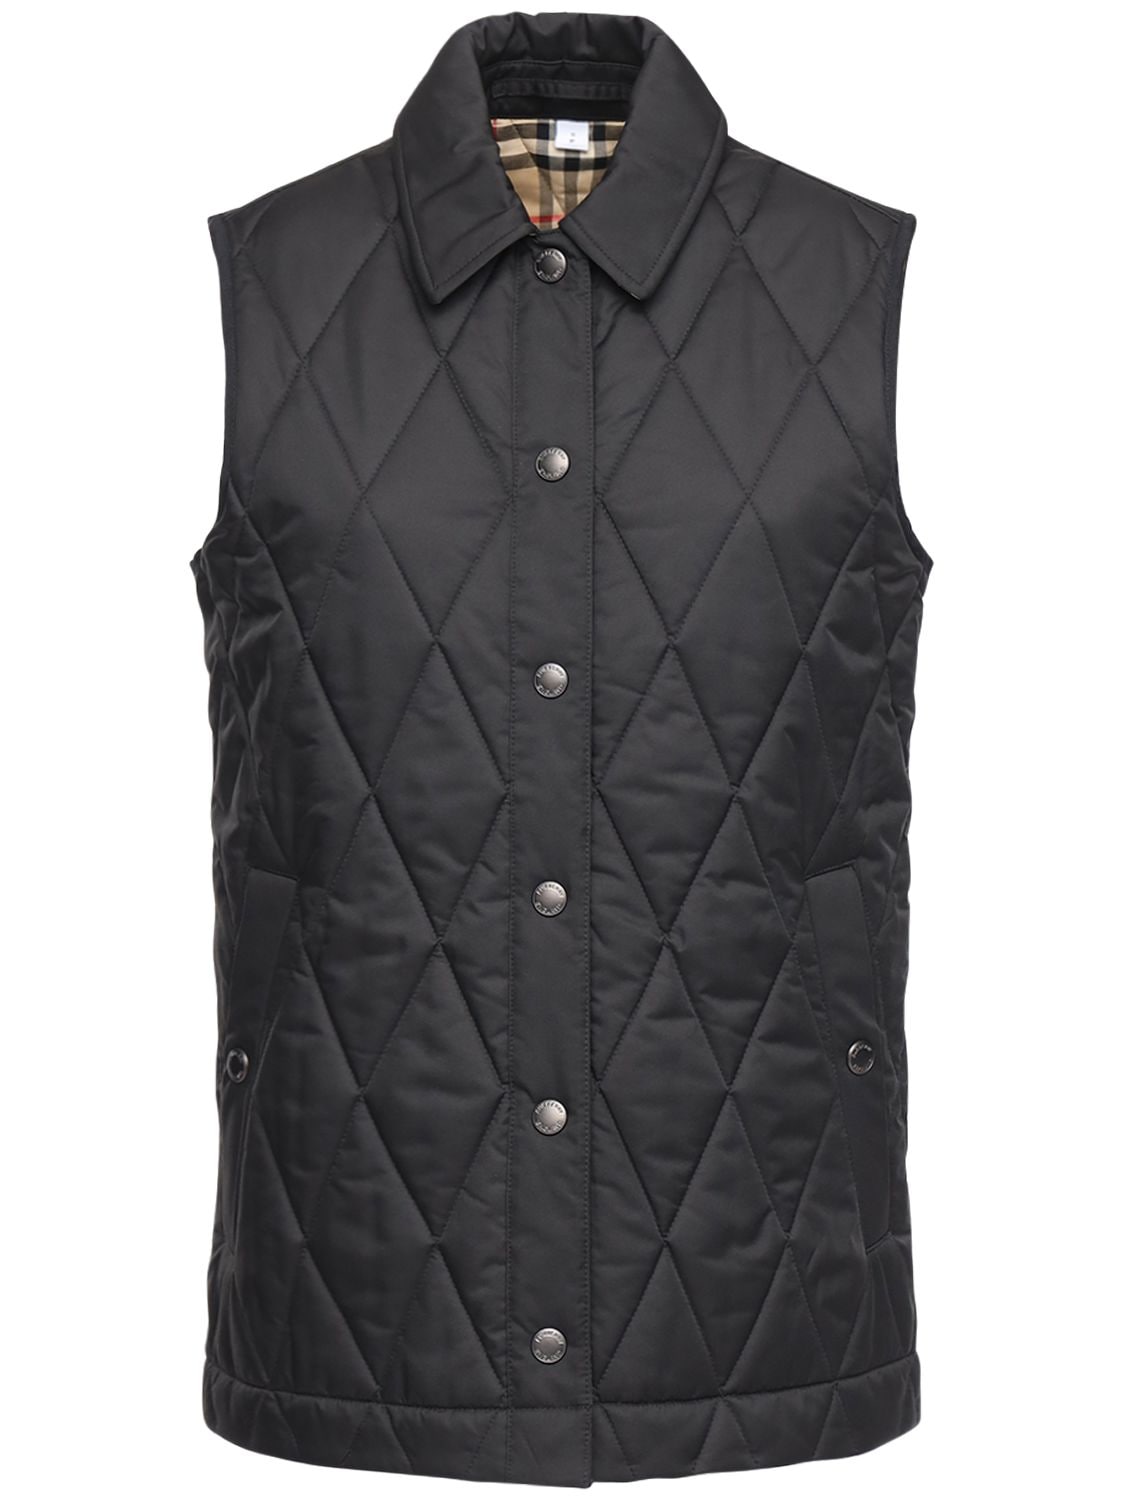 BURBERRY QUILTED waistcoat W/CHECK LINING,72I040004-QTEXODK1